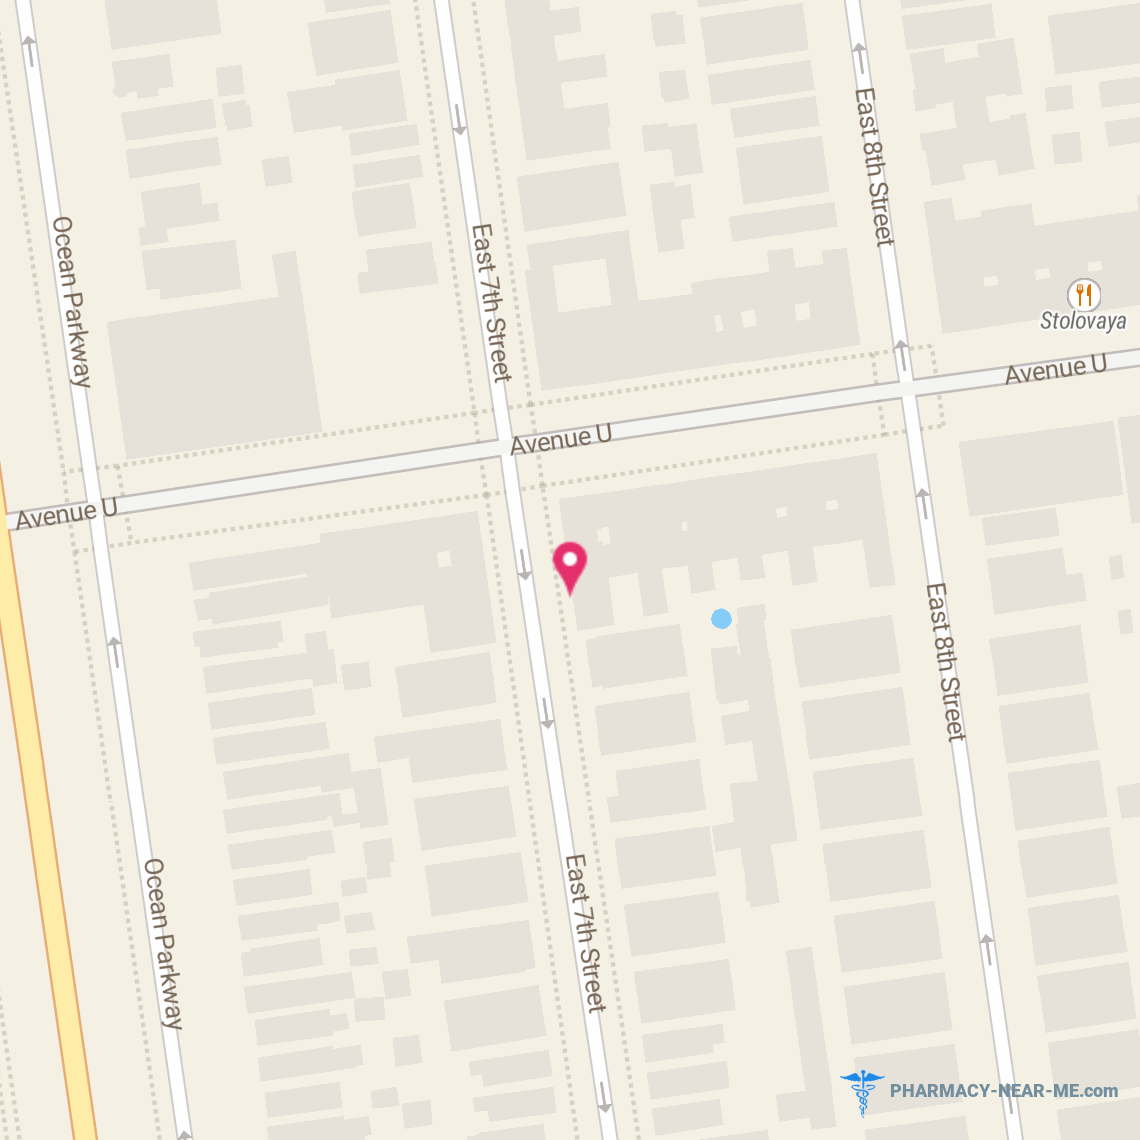 YAFIT PHARMACY - Pharmacy Hours, Phone, Reviews & Information: 2163 East 7th Street, Brooklyn, New York 11223, United States